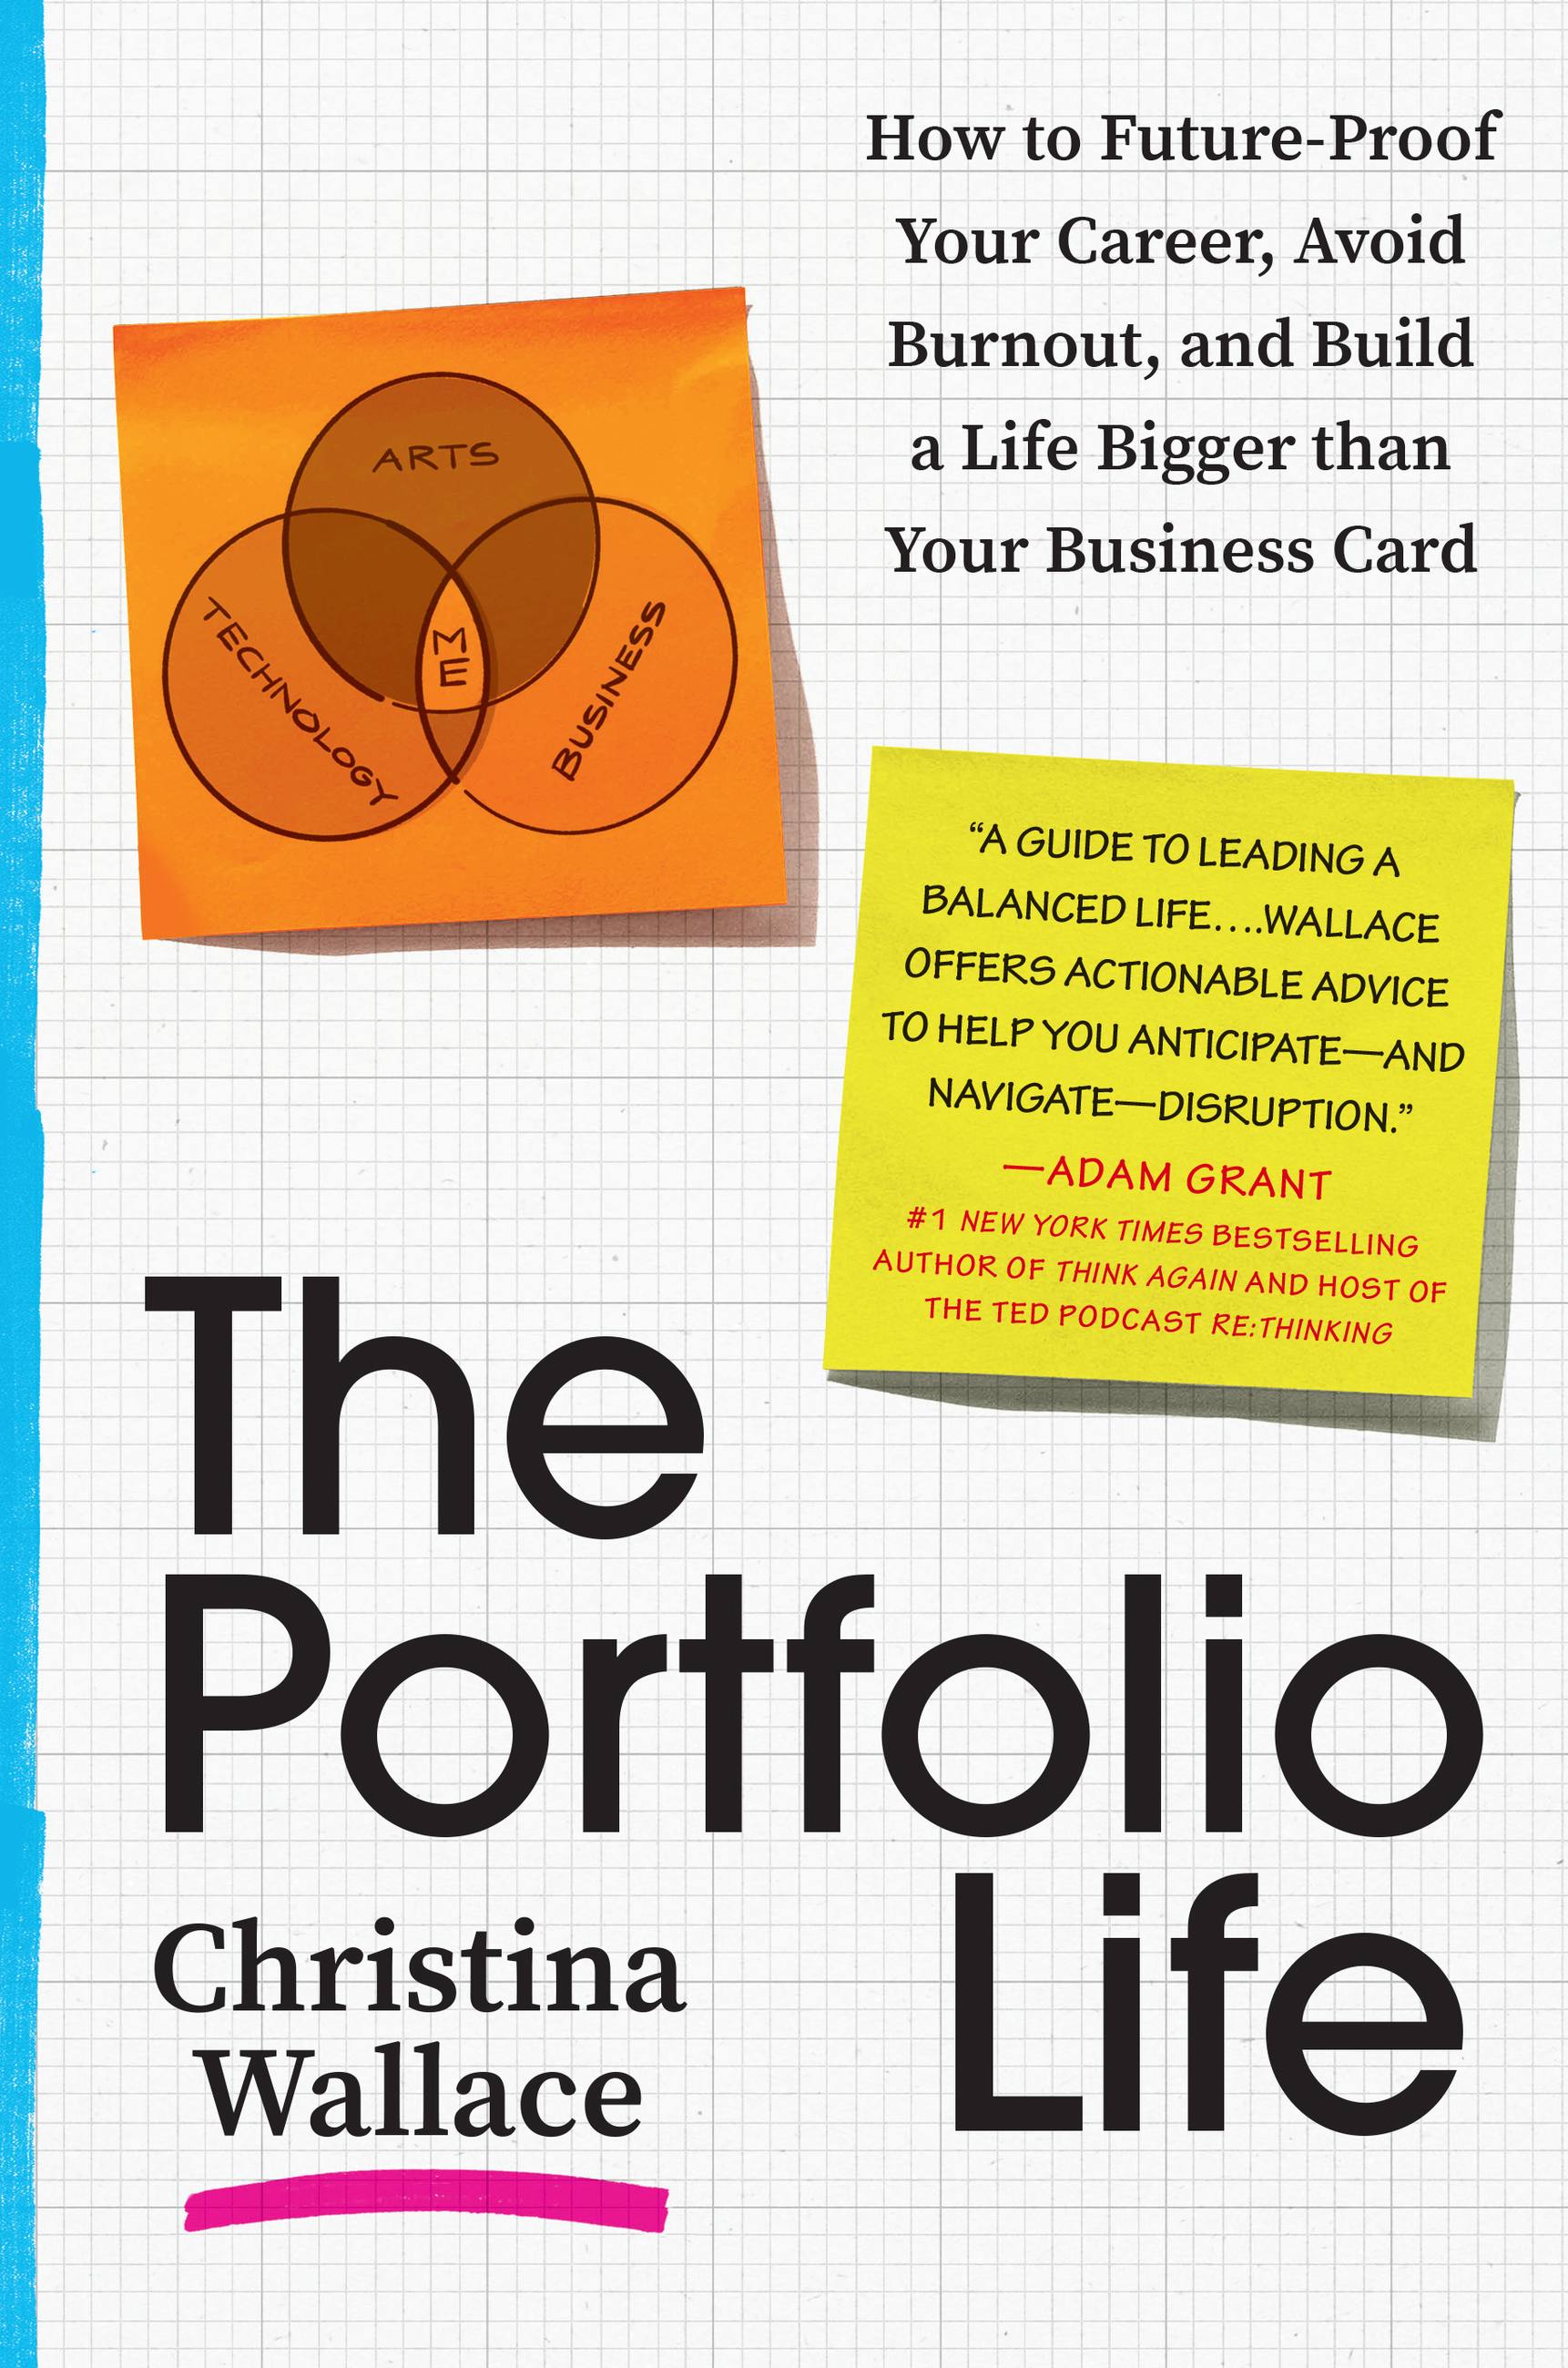 Book　Christina　The　Hachette　by　Portfolio　Wallace　Life　Group